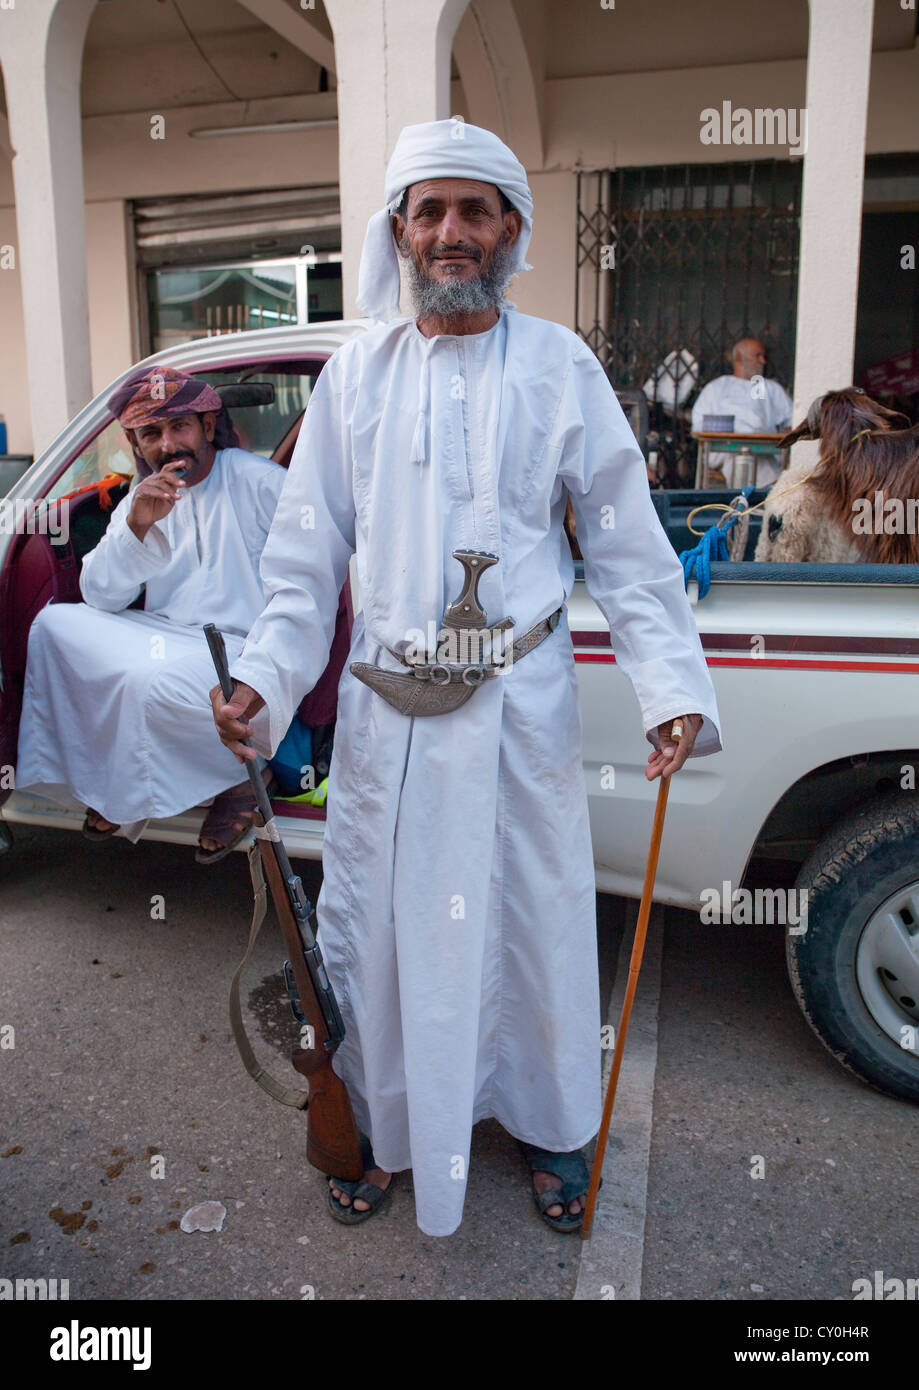 Old Man Wearing A Khanjar And Holding A Gun In The Right Hand While A Stick In The Left Hand, Ibra, Oman Stock Photo